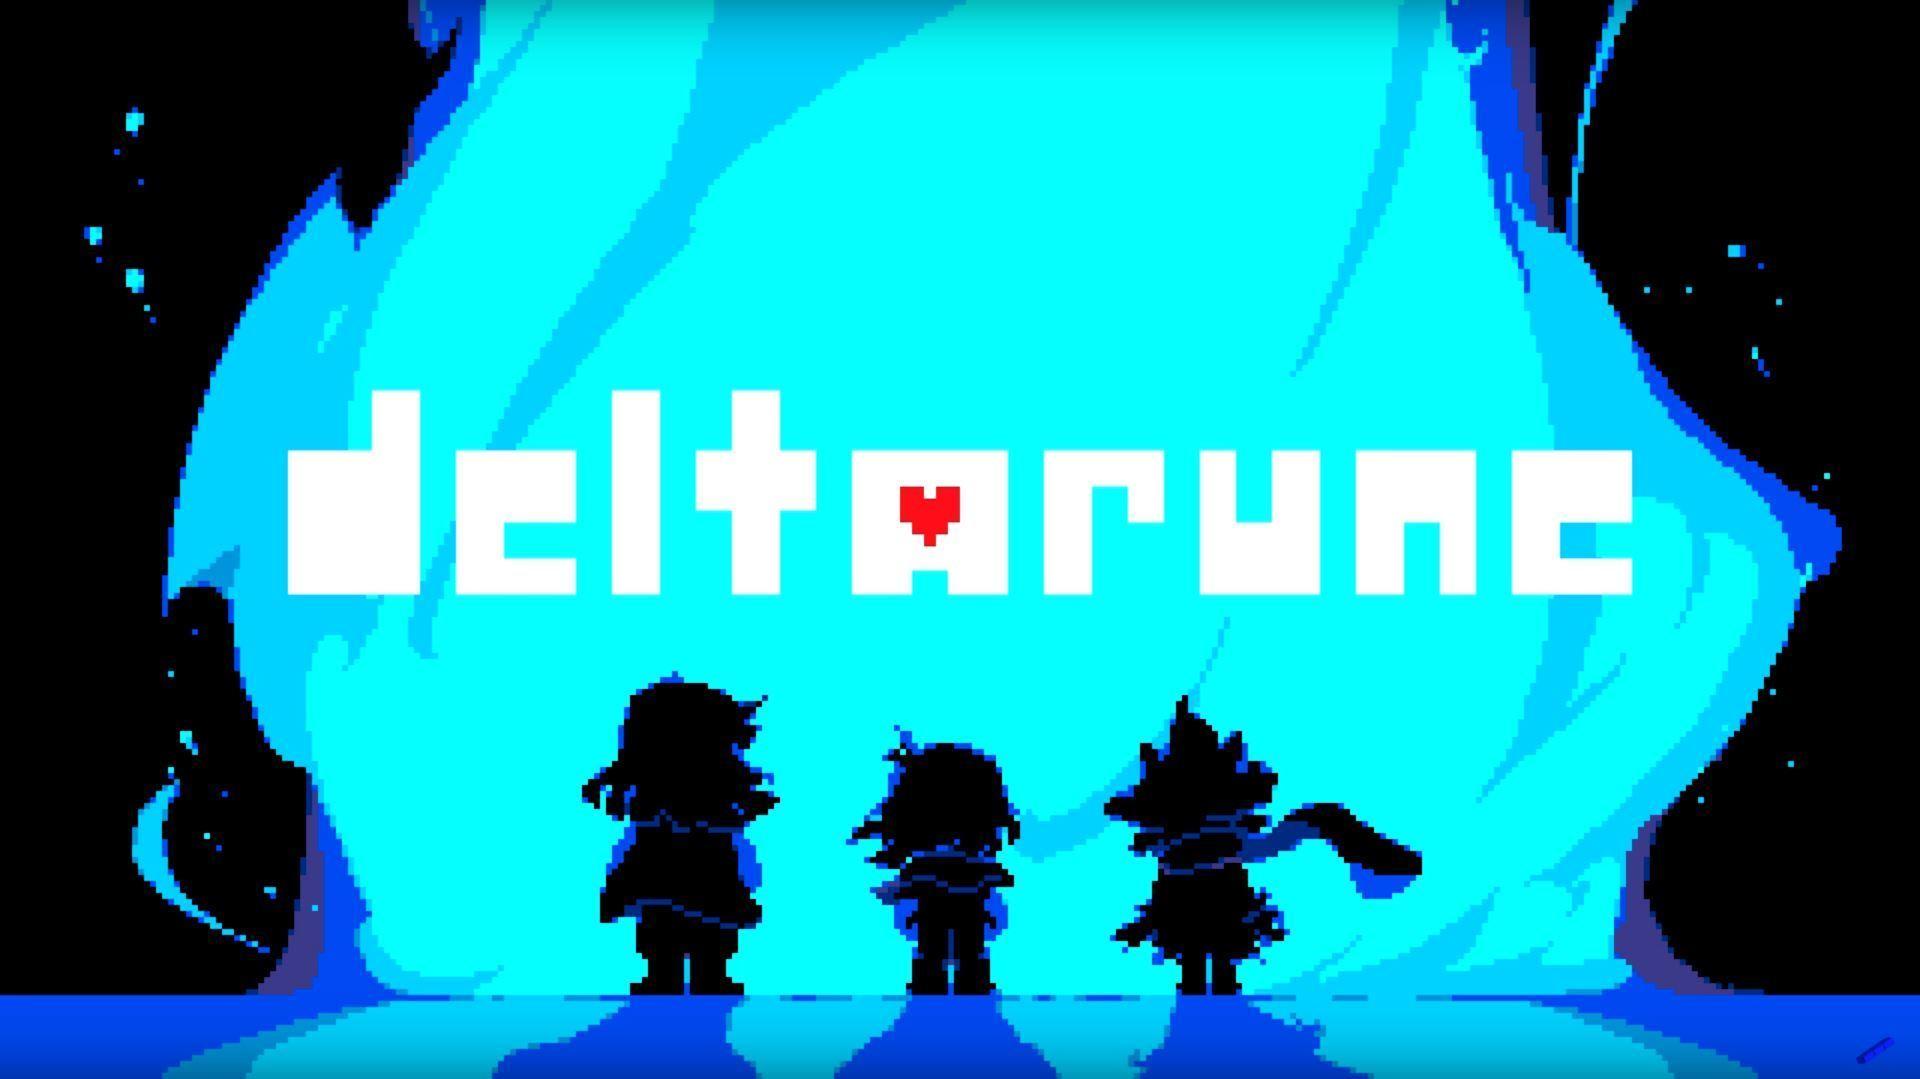 Undertale Follow Up Deltarune: Chapter 1 Coming To Switch For Free